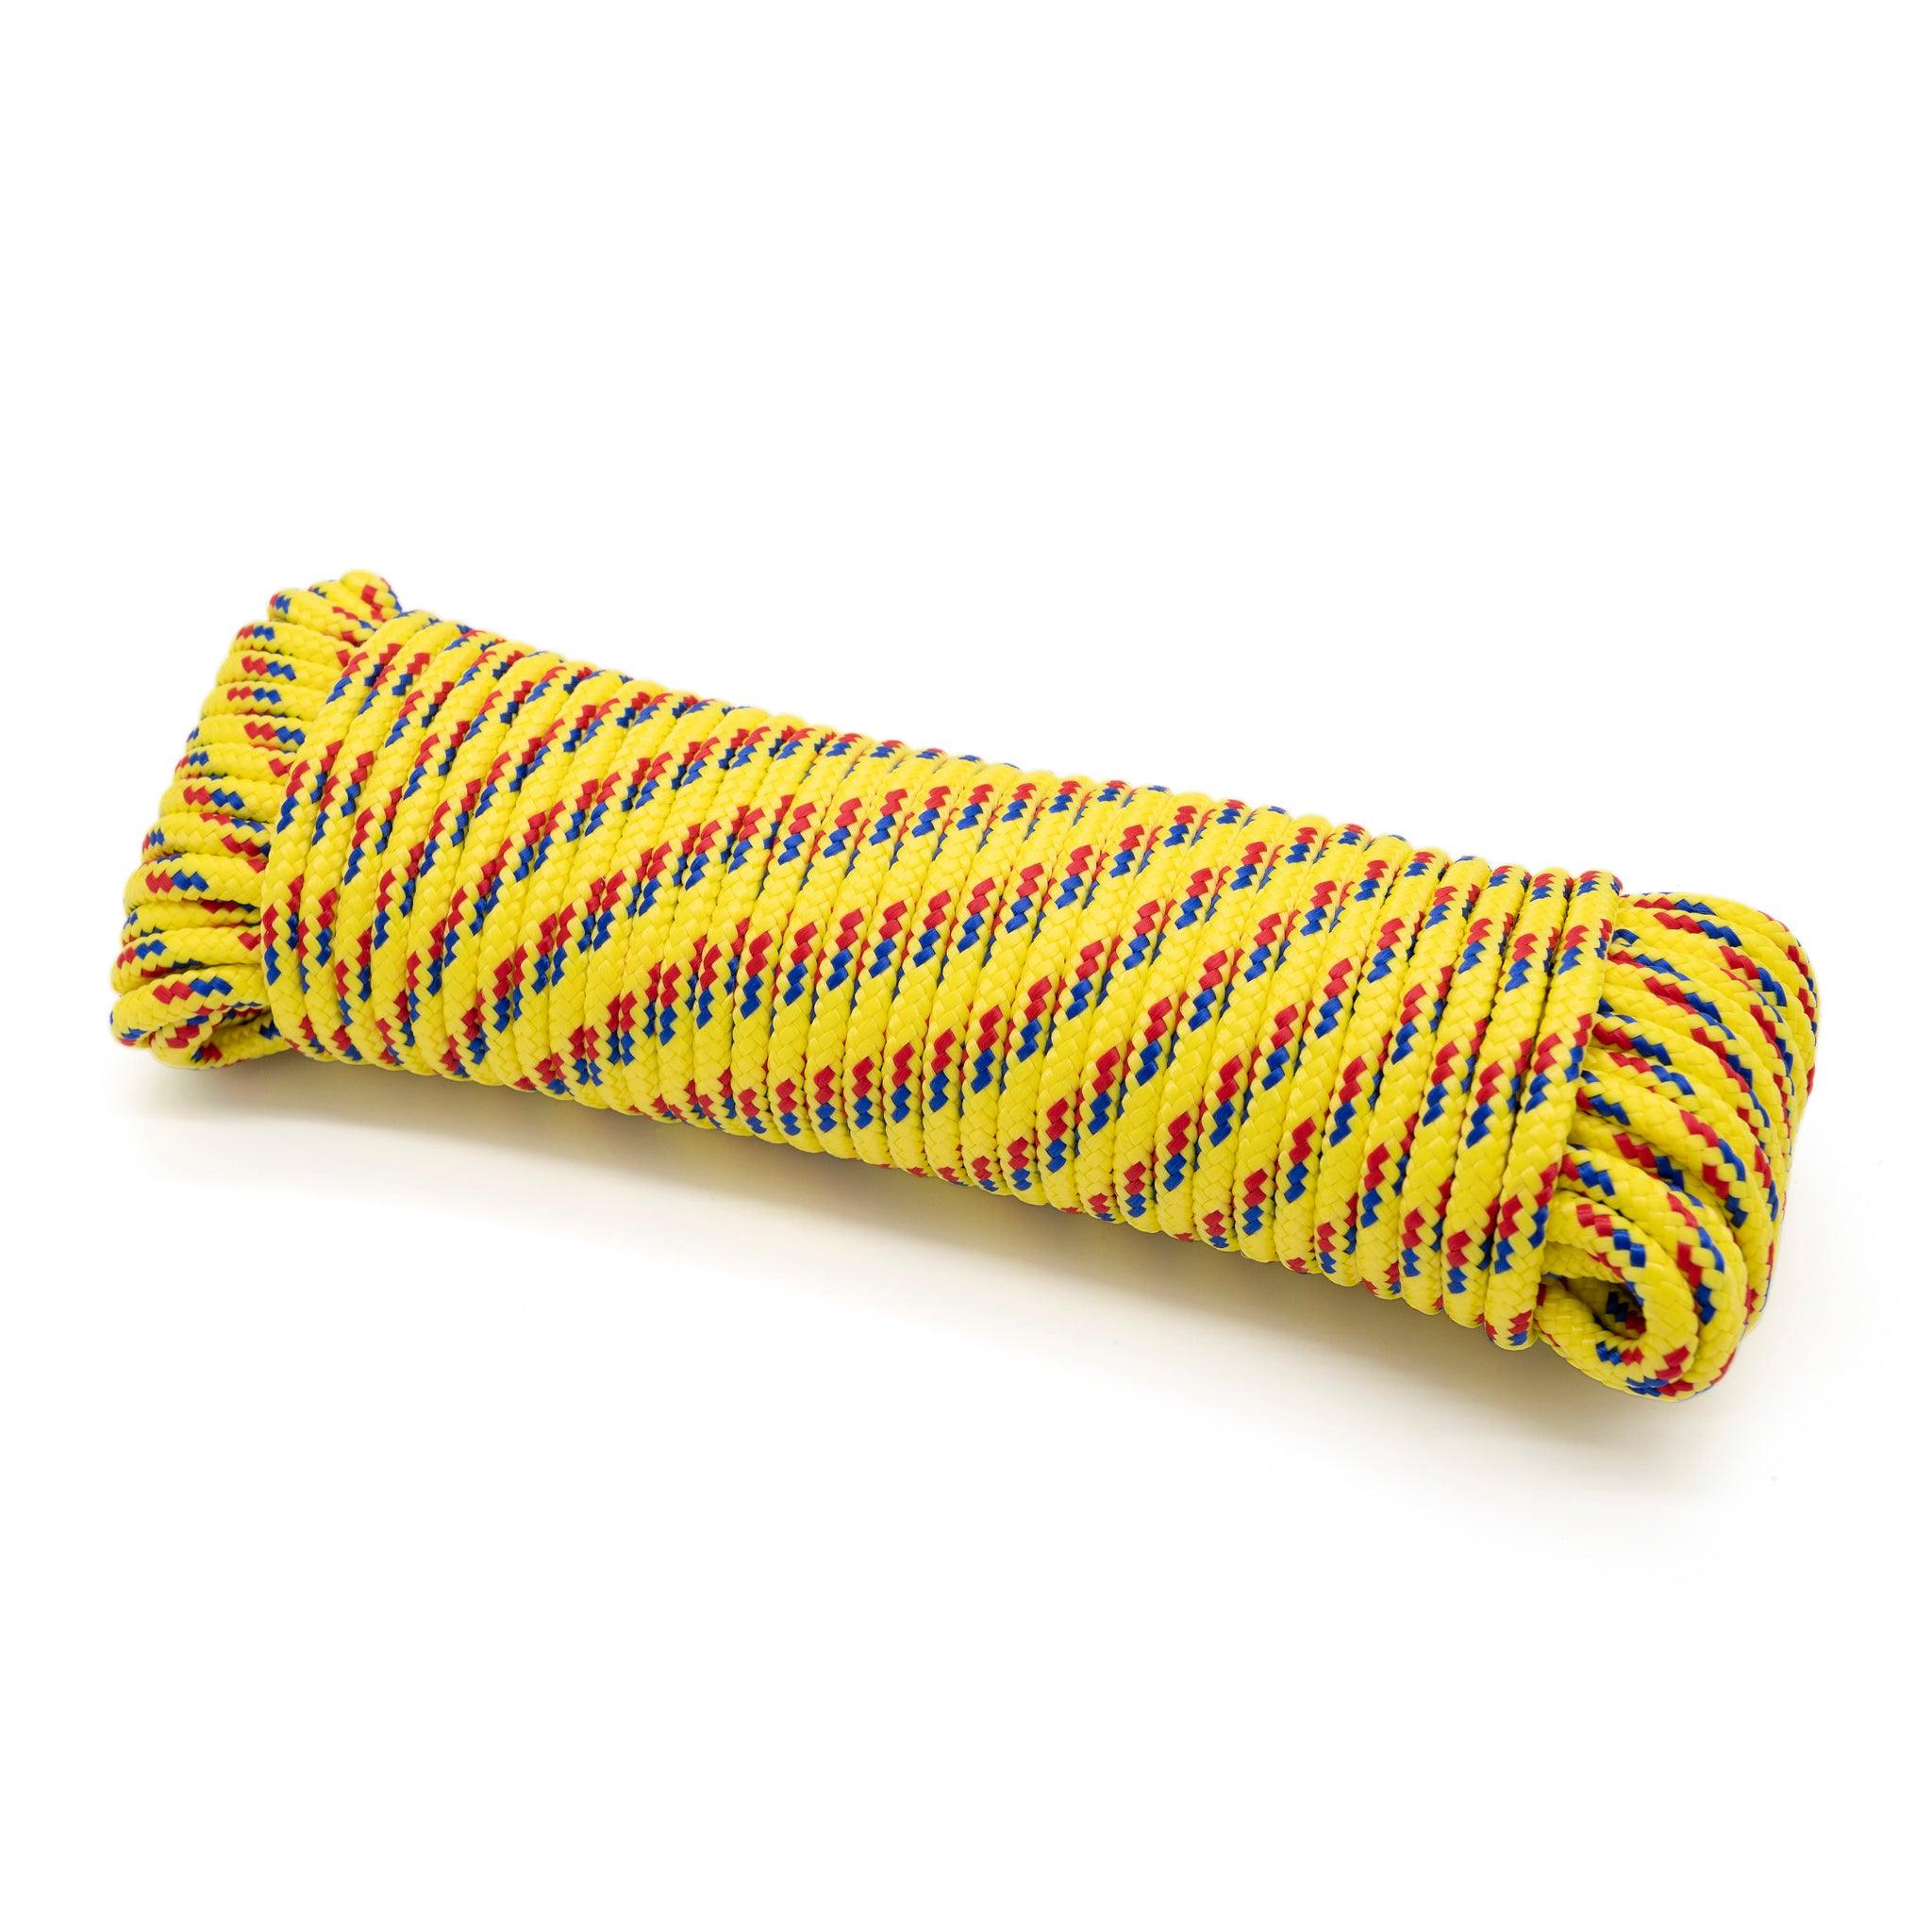 Utility Rope 6mm x 25m - Yellow @ A$12.99